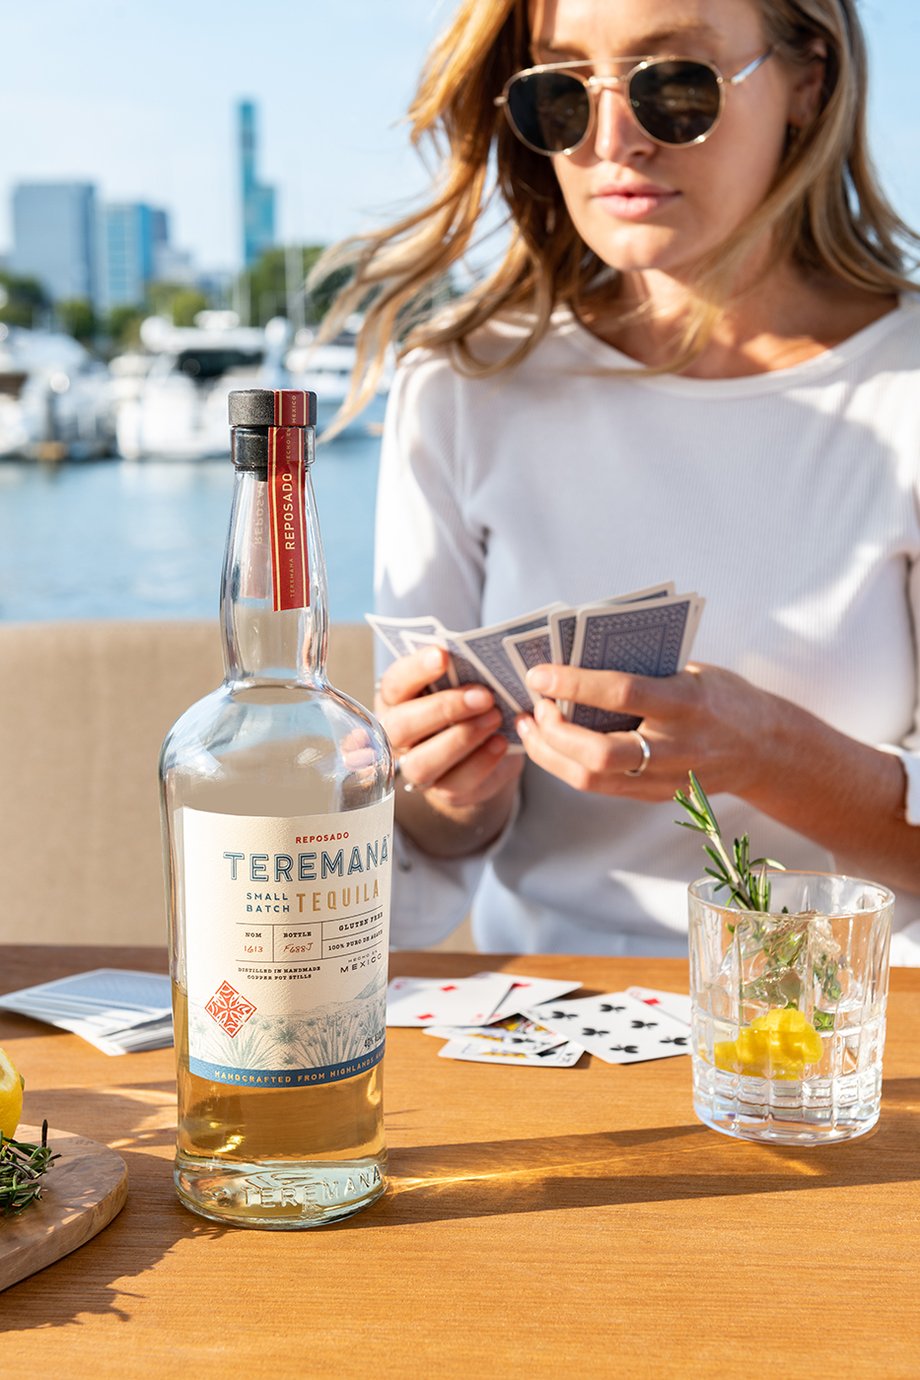 Woman playing cards on a boat with a near empty glass of Teramana Tequila garnished with citrus and rosemary shot by Morgan Ione